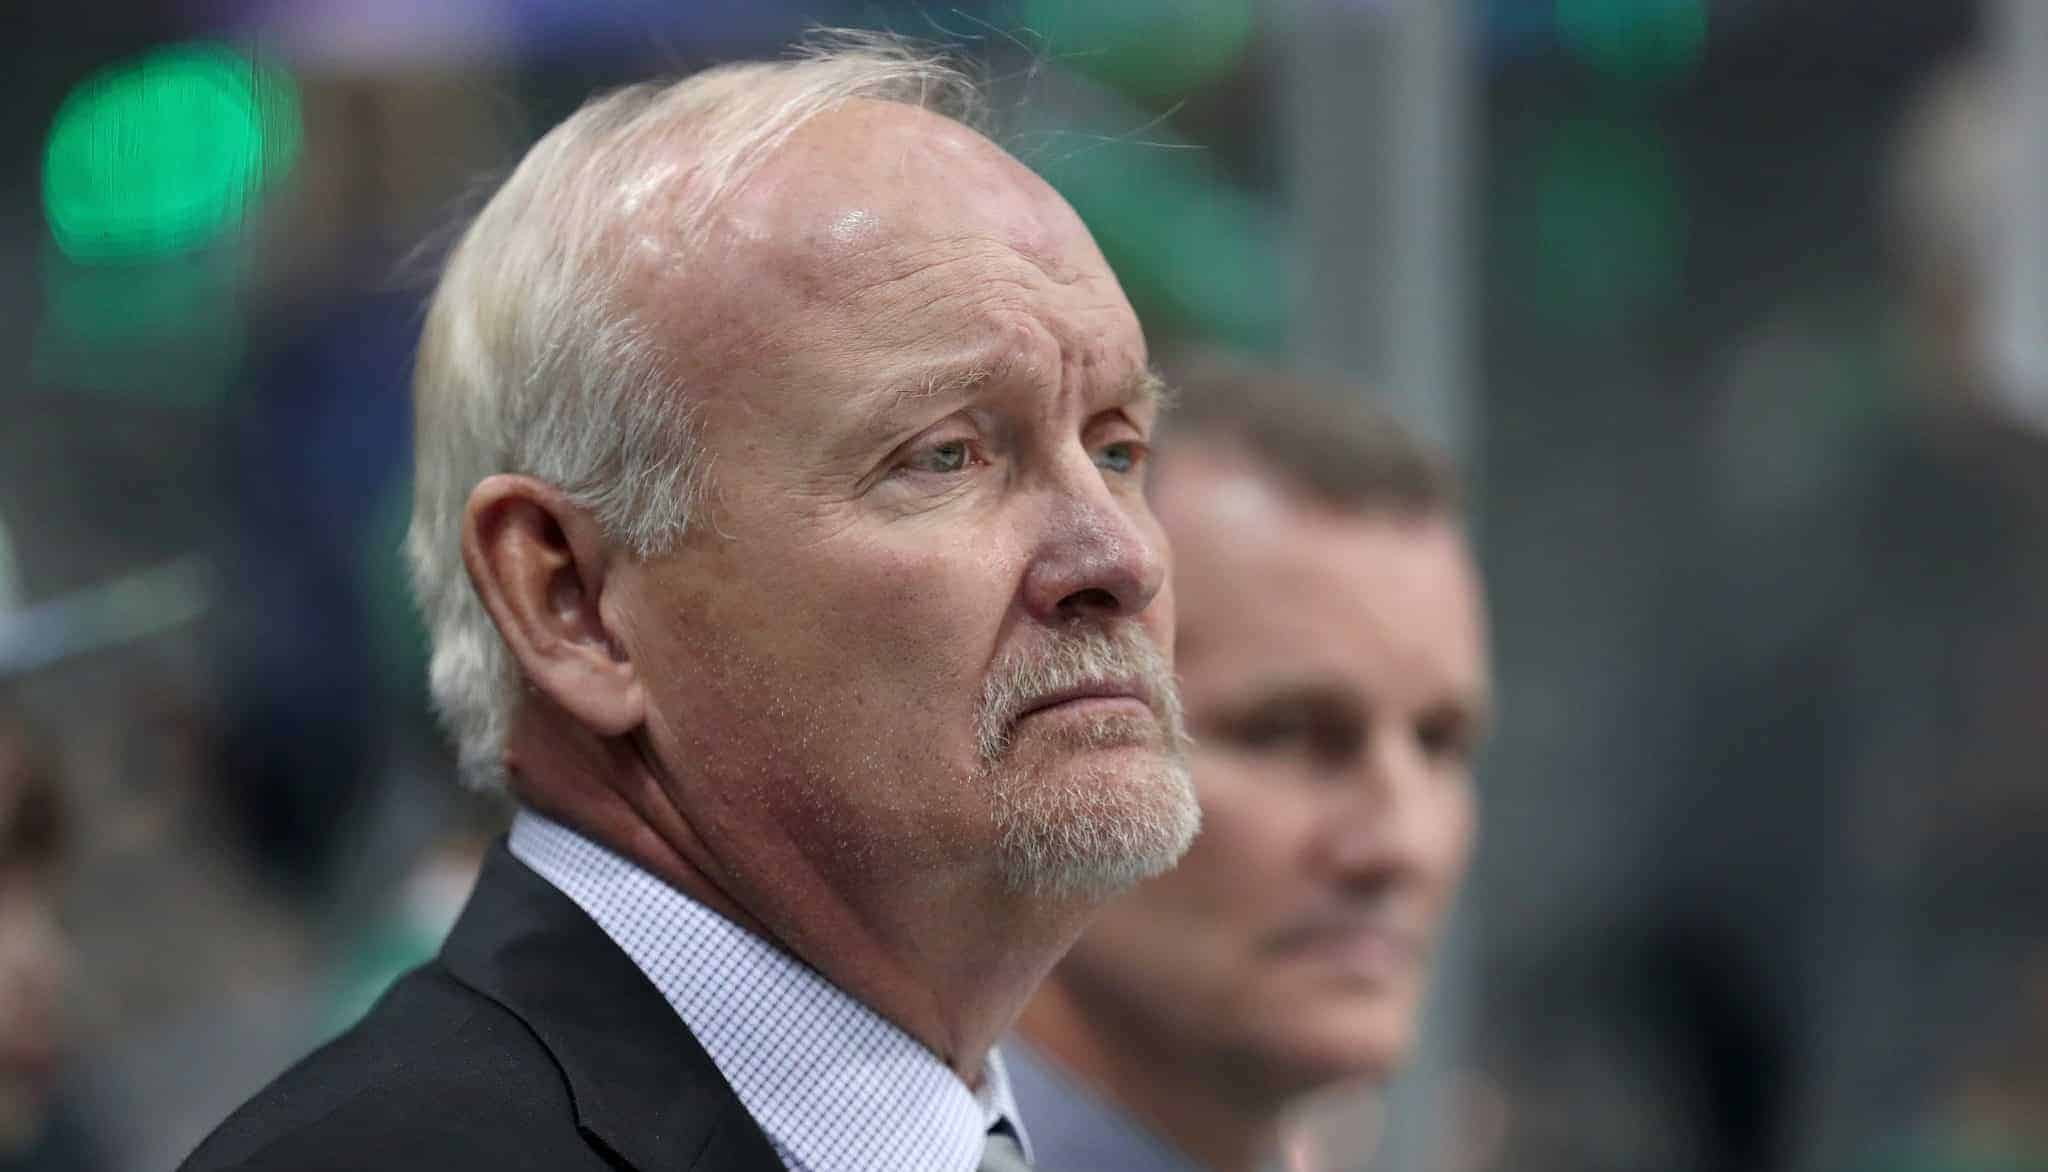 DALLAS, TX - DECEMBER 15: Head coach Lindy Ruff looks on as the Dallas Stars prepare to take on the New York Rangers at American Airlines Center on December 15, 2016 in Dallas, Texas.